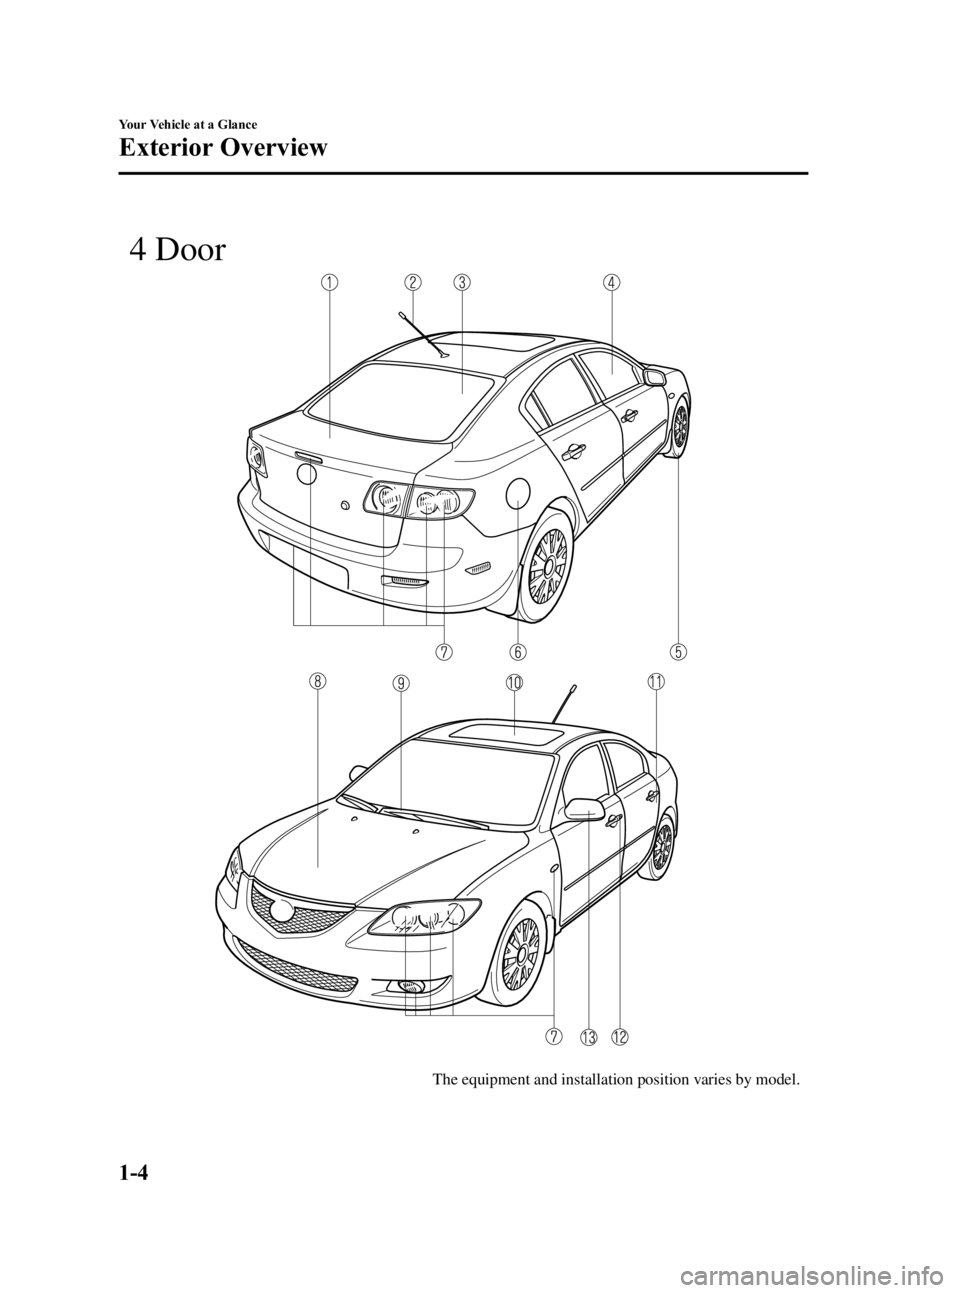 MAZDA MODEL 3 4-DOOR 2006  Owners Manual Black plate (10,1)
The equipment and installation position varies by model.
 4 Door
1-4
Your Vehicle at a Glance
Exterior Overview
Mazda3_8U55-EA-05G_Edition3 Page10
Tuesday, September 13 2005 10:40 A